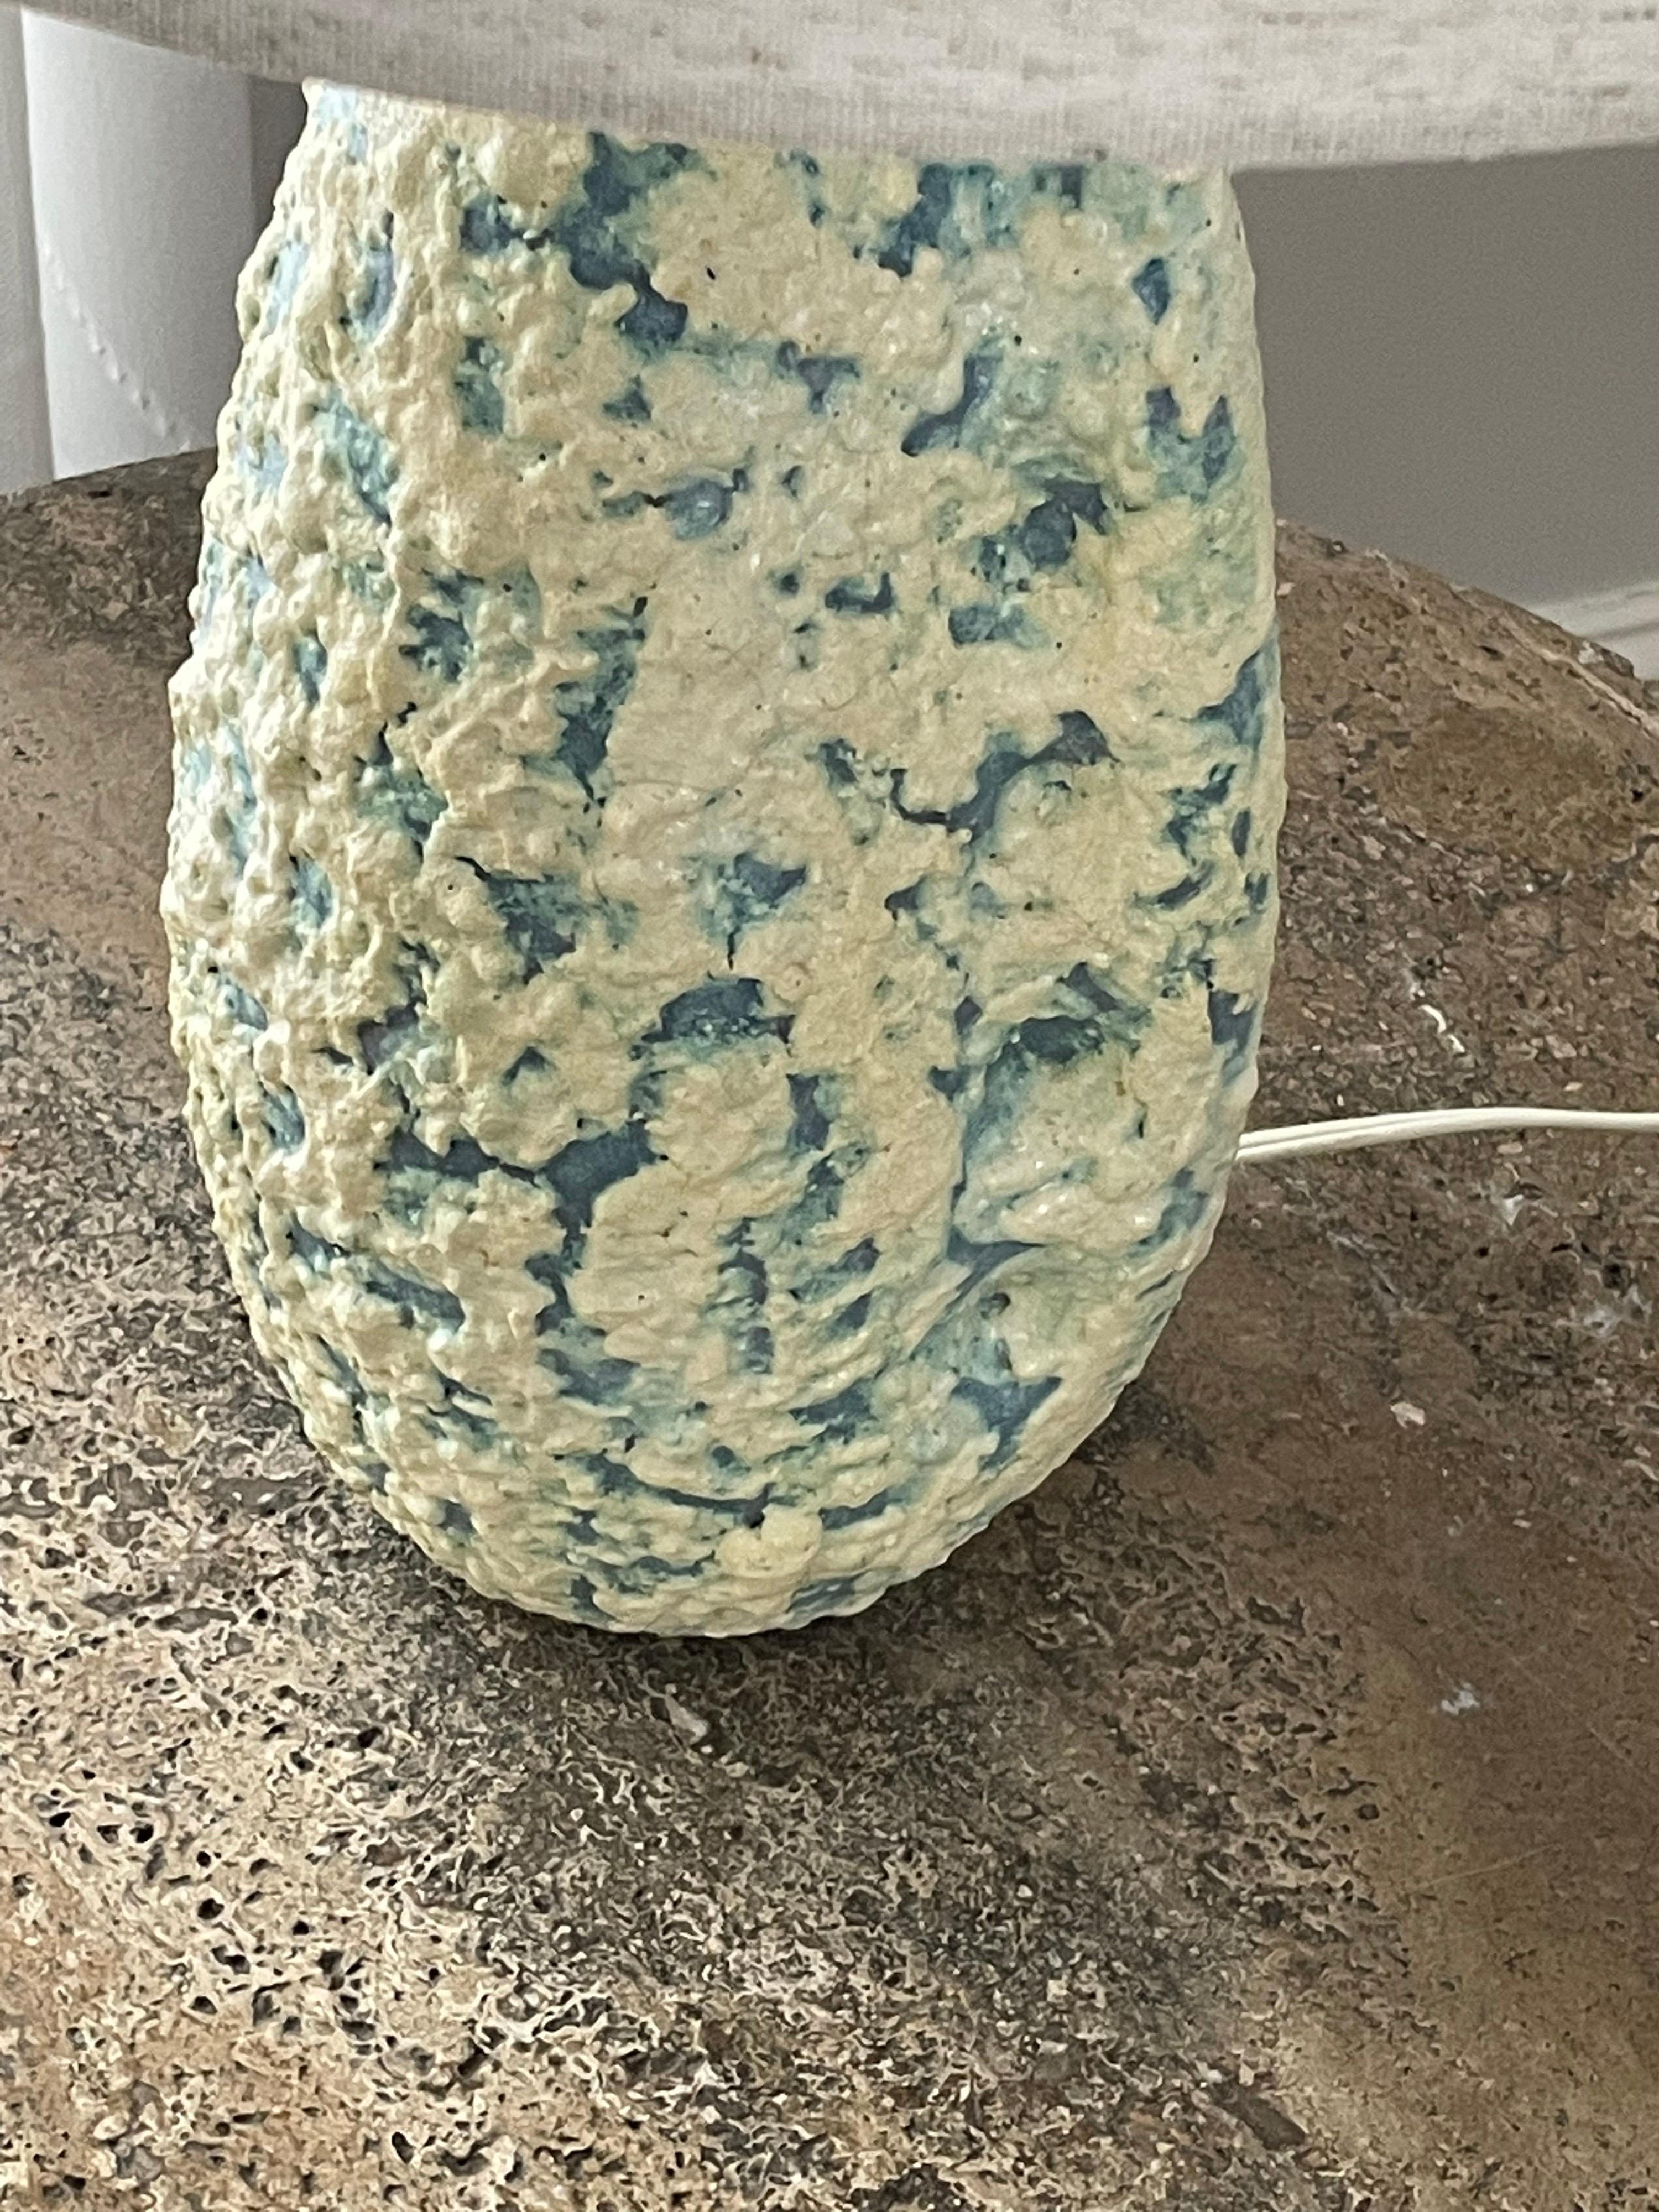 Table lamp by Marcello Fantoni. Heavily textured lava glaze with light blue, light green, and cream colors. 

Overall Dimensions
24” tall
15” wide

Ceramic Portion
13” tall 
6” wide
5.5” deep

Other notable designers from the period include Guido